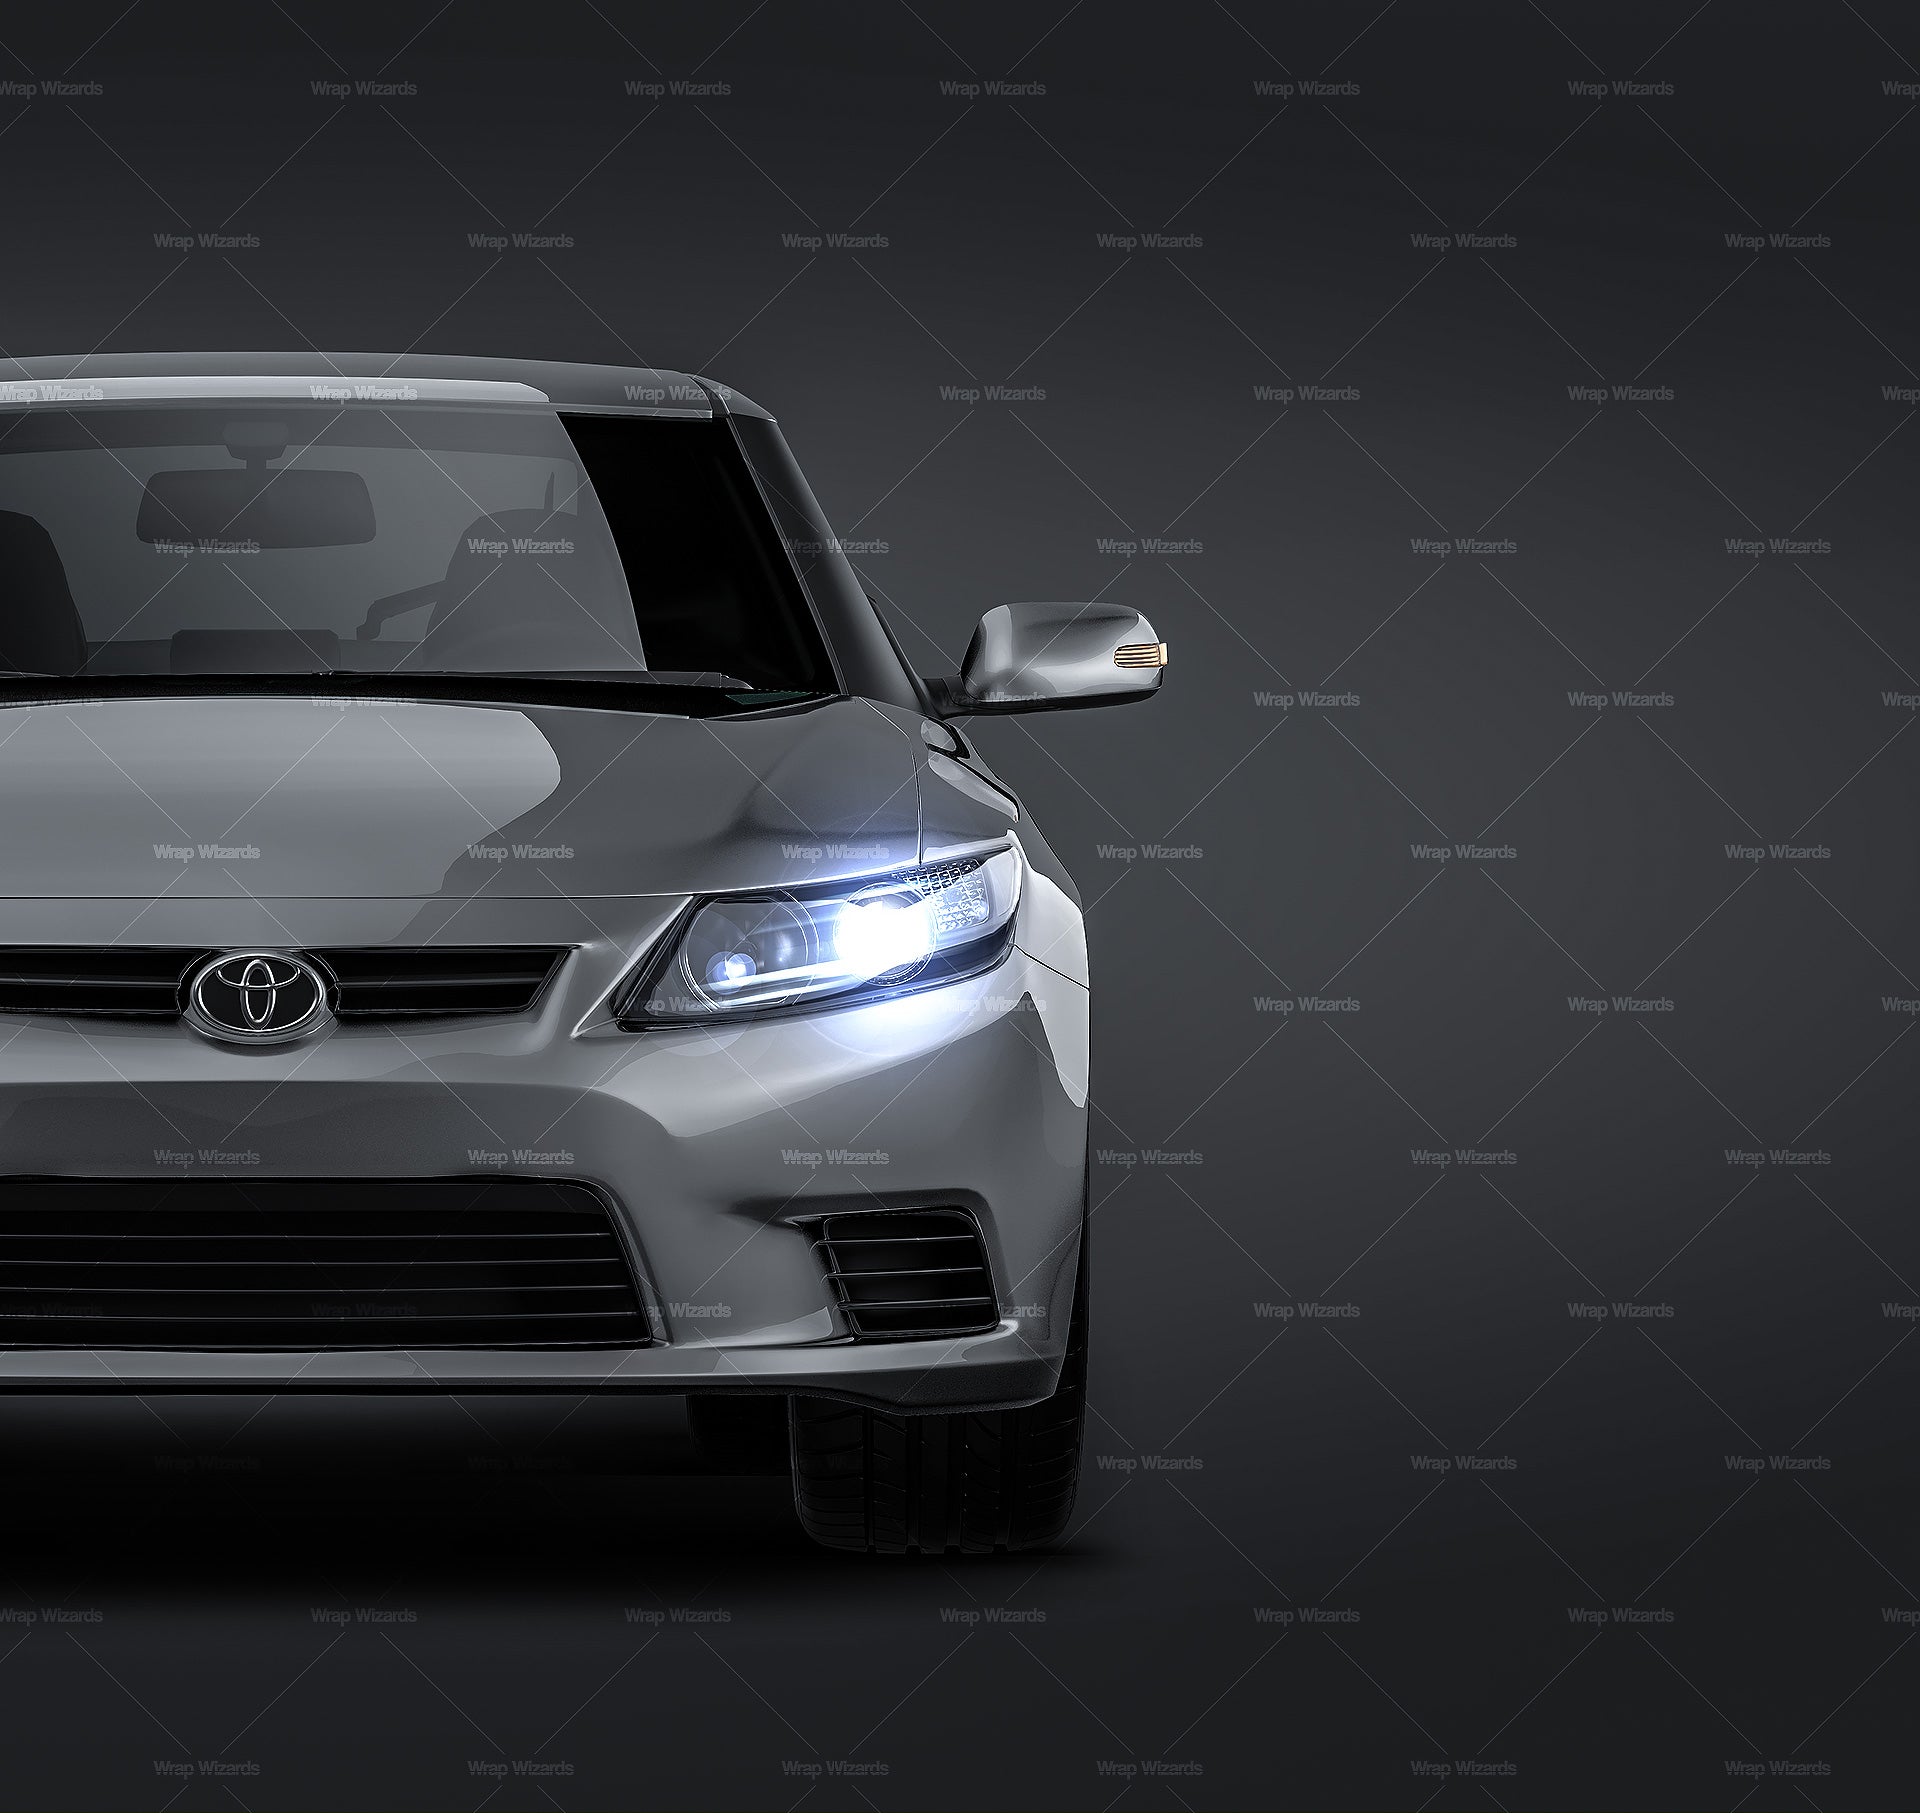 Toyota Zelas 2011 glossy finish - all sides Car Mockup Template.psd